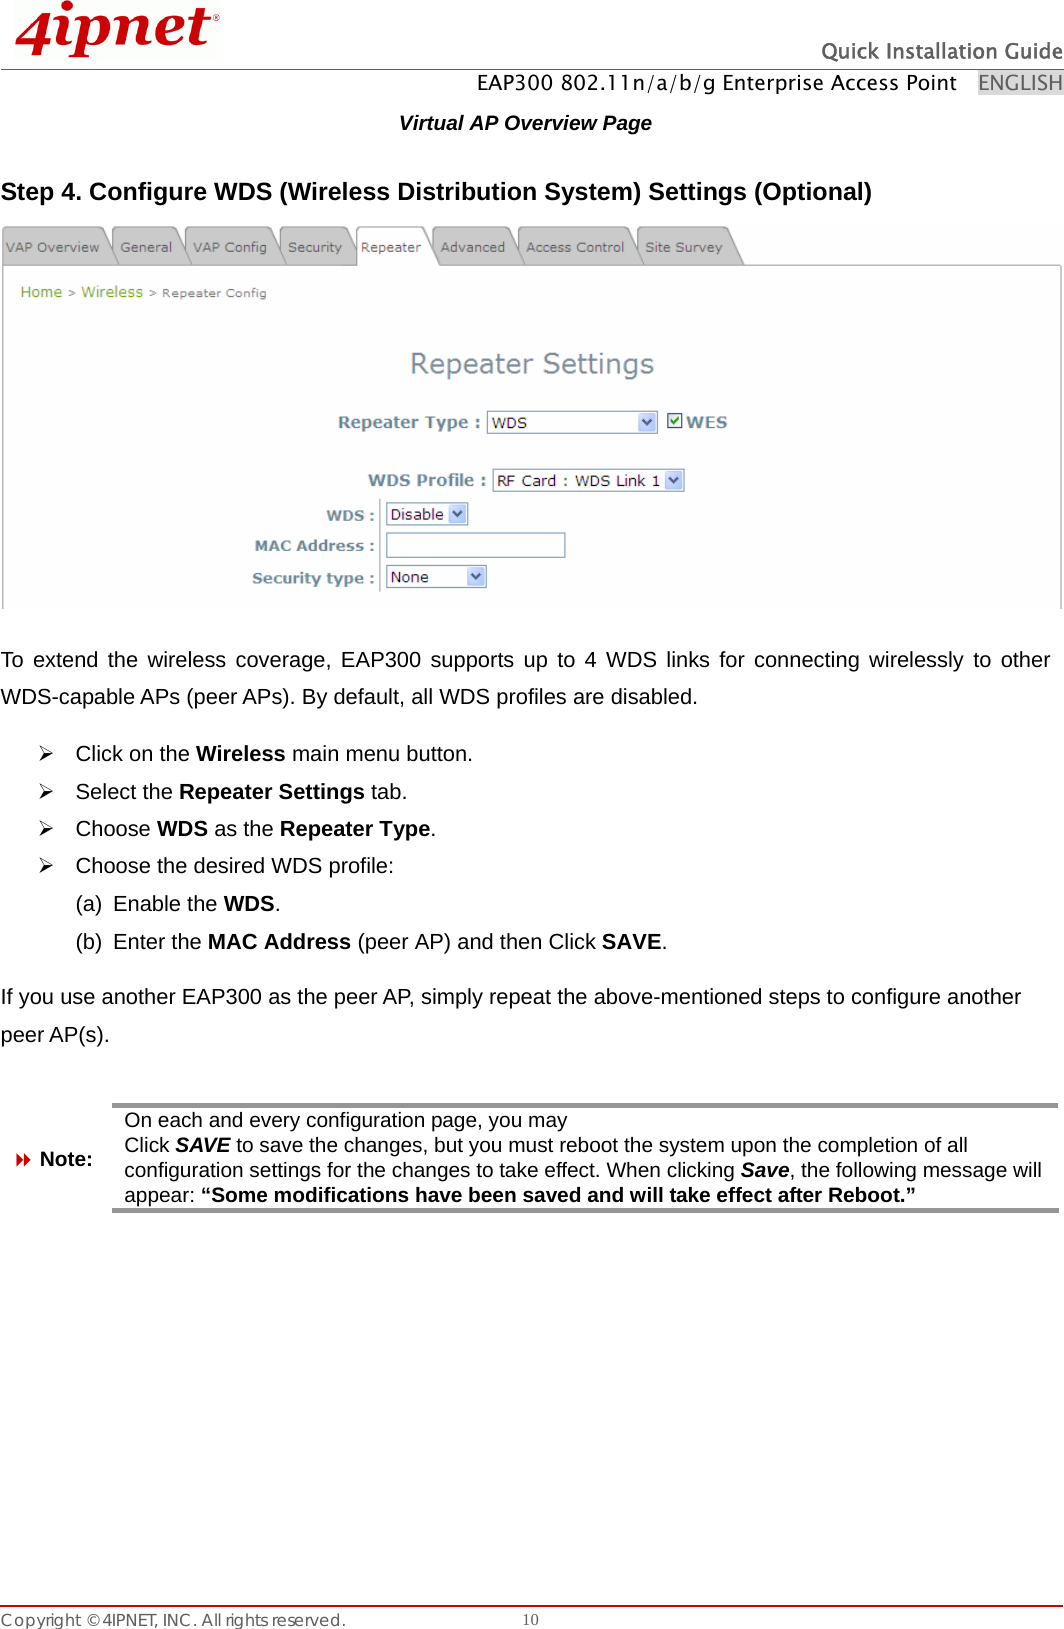  Quick Installation Guide EAP300 802.11n/a/b/g Enterprise Access Point    ENGLISH Copyright © 4IPNET, INC. All rights reserved.    10Virtual AP Overview Page Step 4. Configure WDS (Wireless Distribution System) Settings (Optional)  To extend the wireless coverage, EAP300 supports up to 4 WDS links for connecting wirelessly to other WDS-capable APs (peer APs). By default, all WDS profiles are disabled. ¾  Click on the Wireless main menu button. ¾ Select the Repeater Settings tab. ¾ Choose WDS as the Repeater Type. ¾  Choose the desired WDS profile: (a) Enable the WDS.   (b) Enter the MAC Address (peer AP) and then Click SAVE.    If you use another EAP300 as the peer AP, simply repeat the above-mentioned steps to configure another peer AP(s).   Note: On each and every configuration page, you may Click SAVE to save the changes, but you must reboot the system upon the completion of all configuration settings for the changes to take effect. When clicking Save, the following message will appear: “Some modifications have been saved and will take effect after Reboot.”         